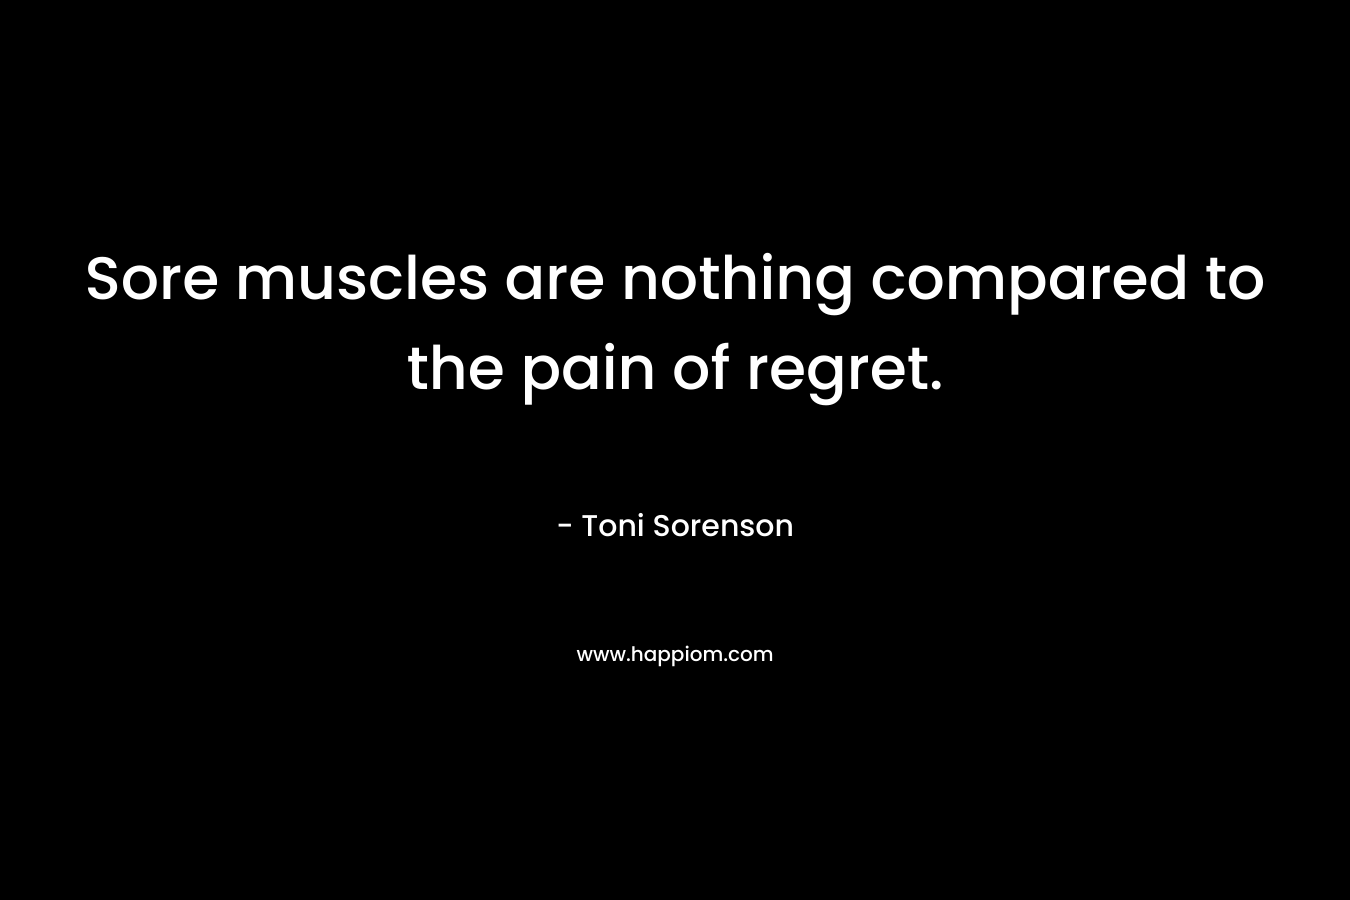 Sore muscles are nothing compared to the pain of regret.